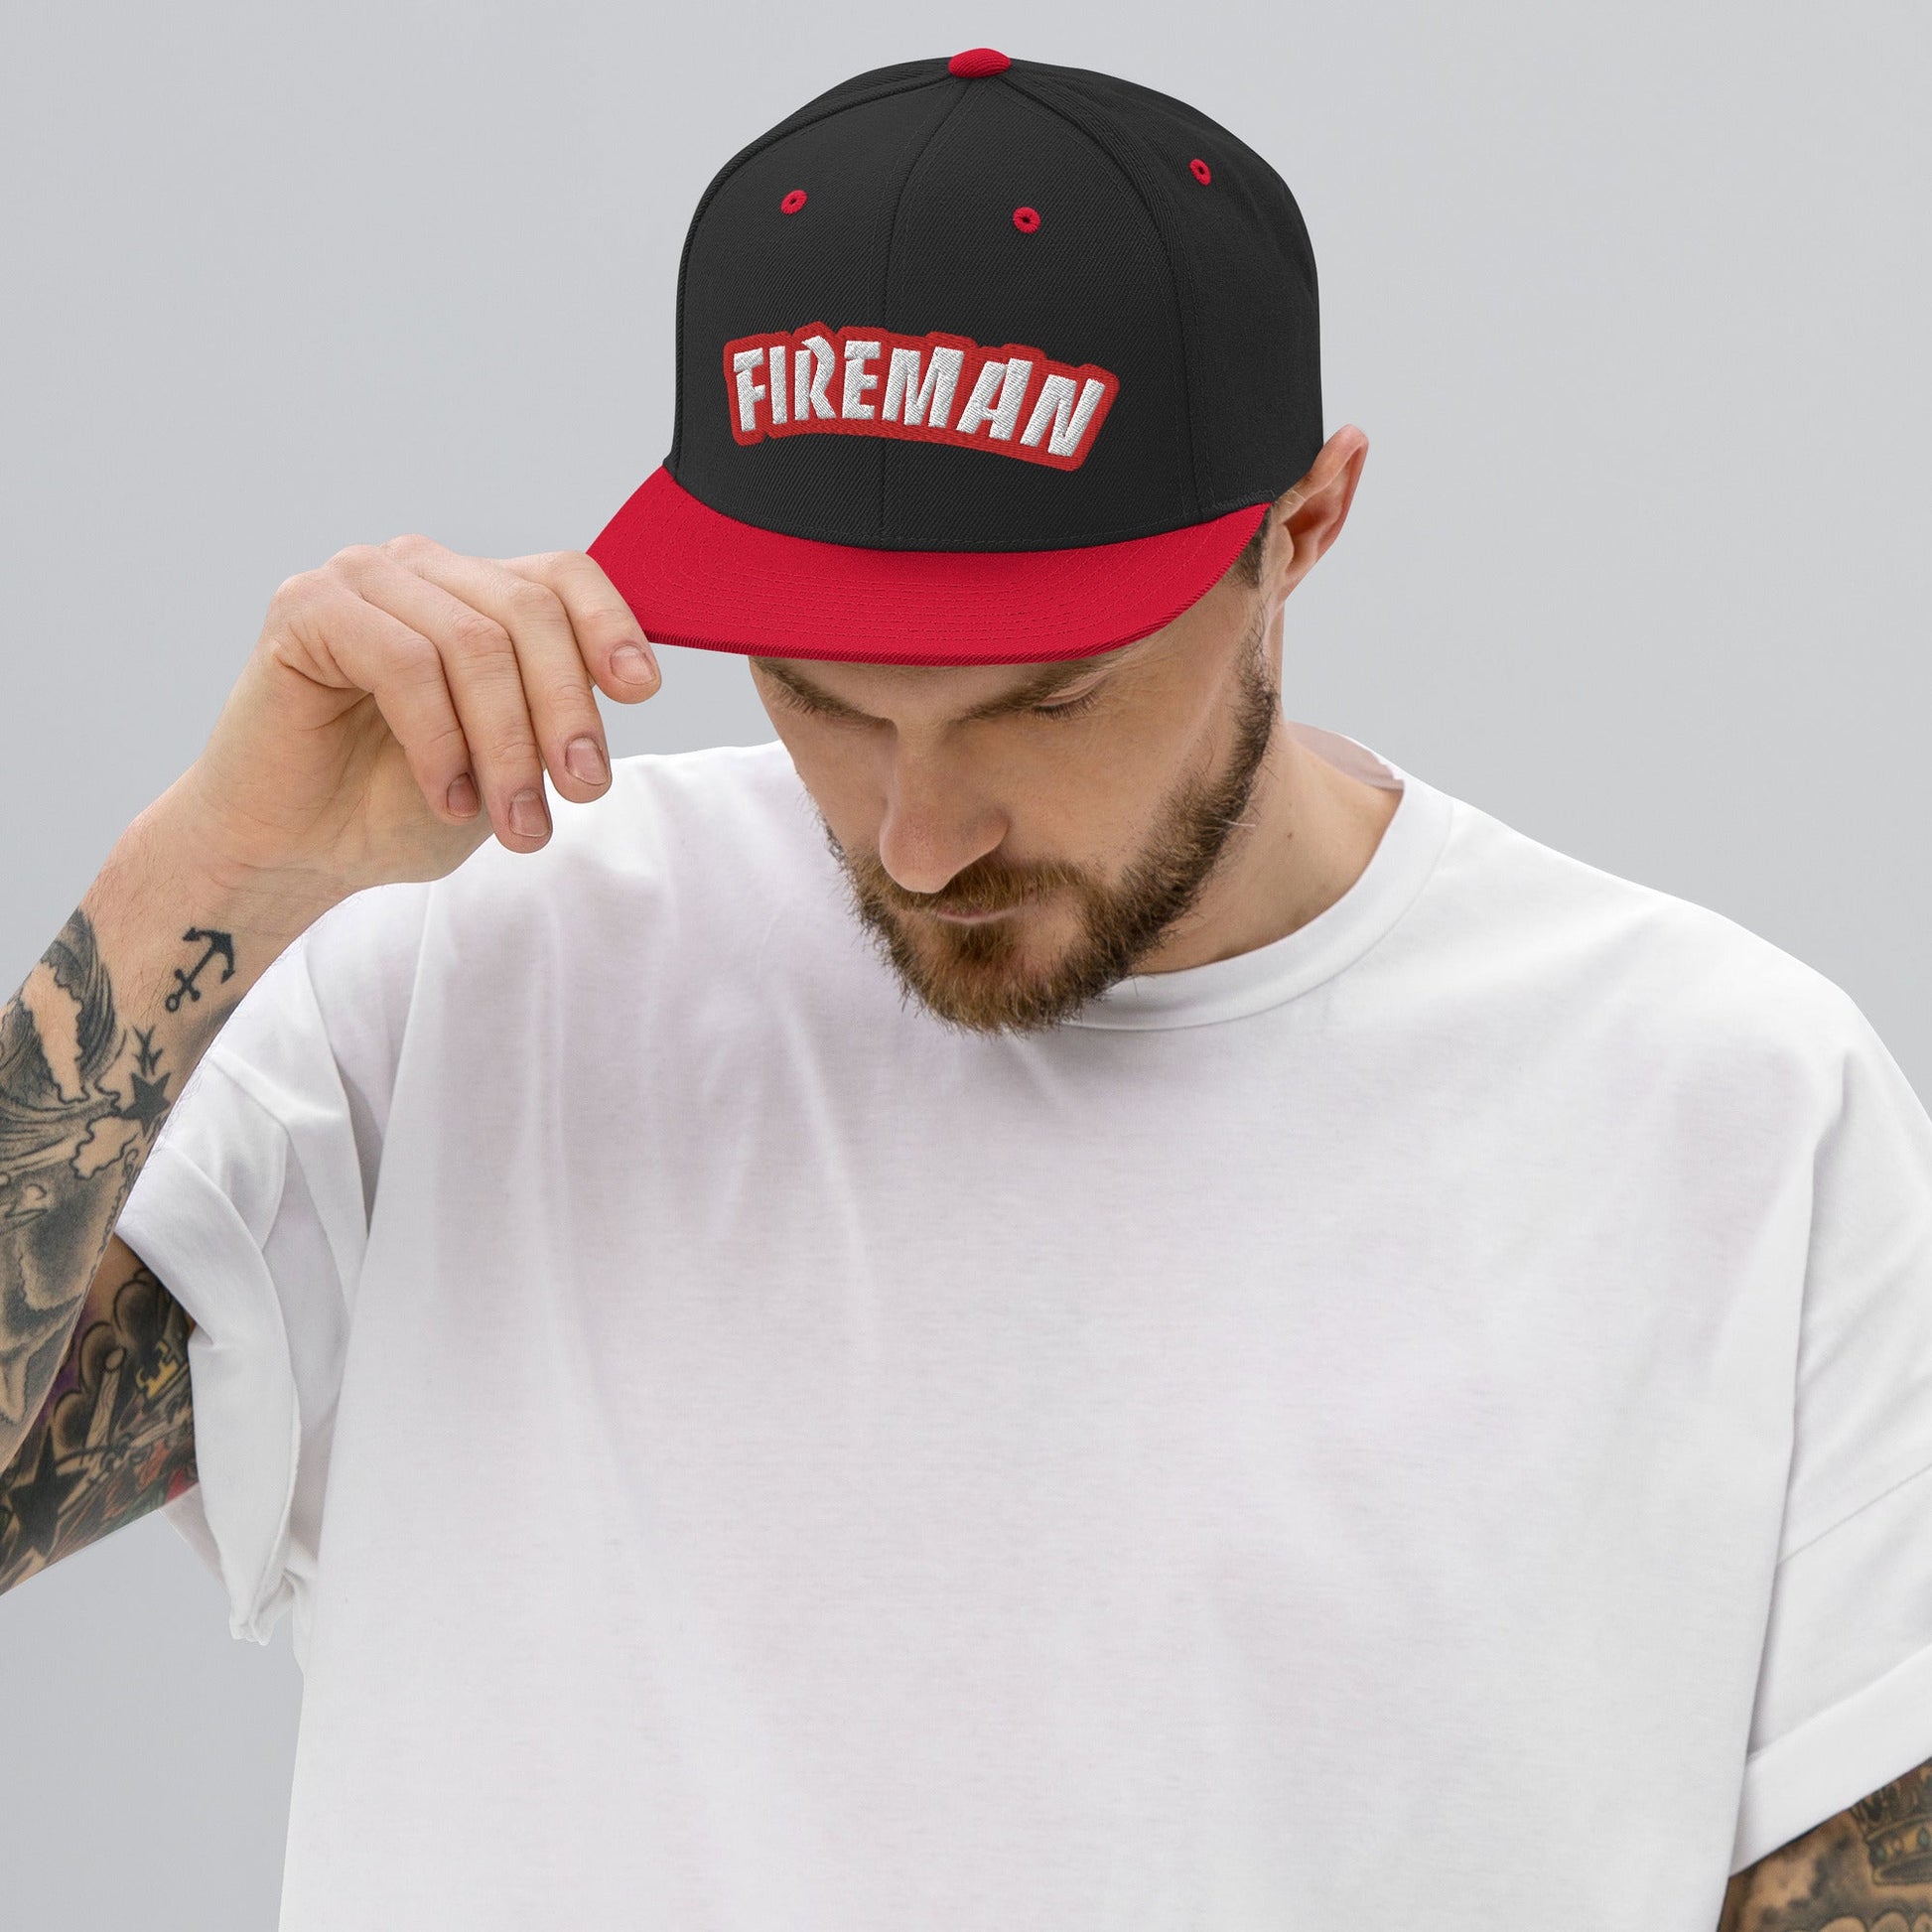 Man wearing Black and red snapback with Fireman text on grey background